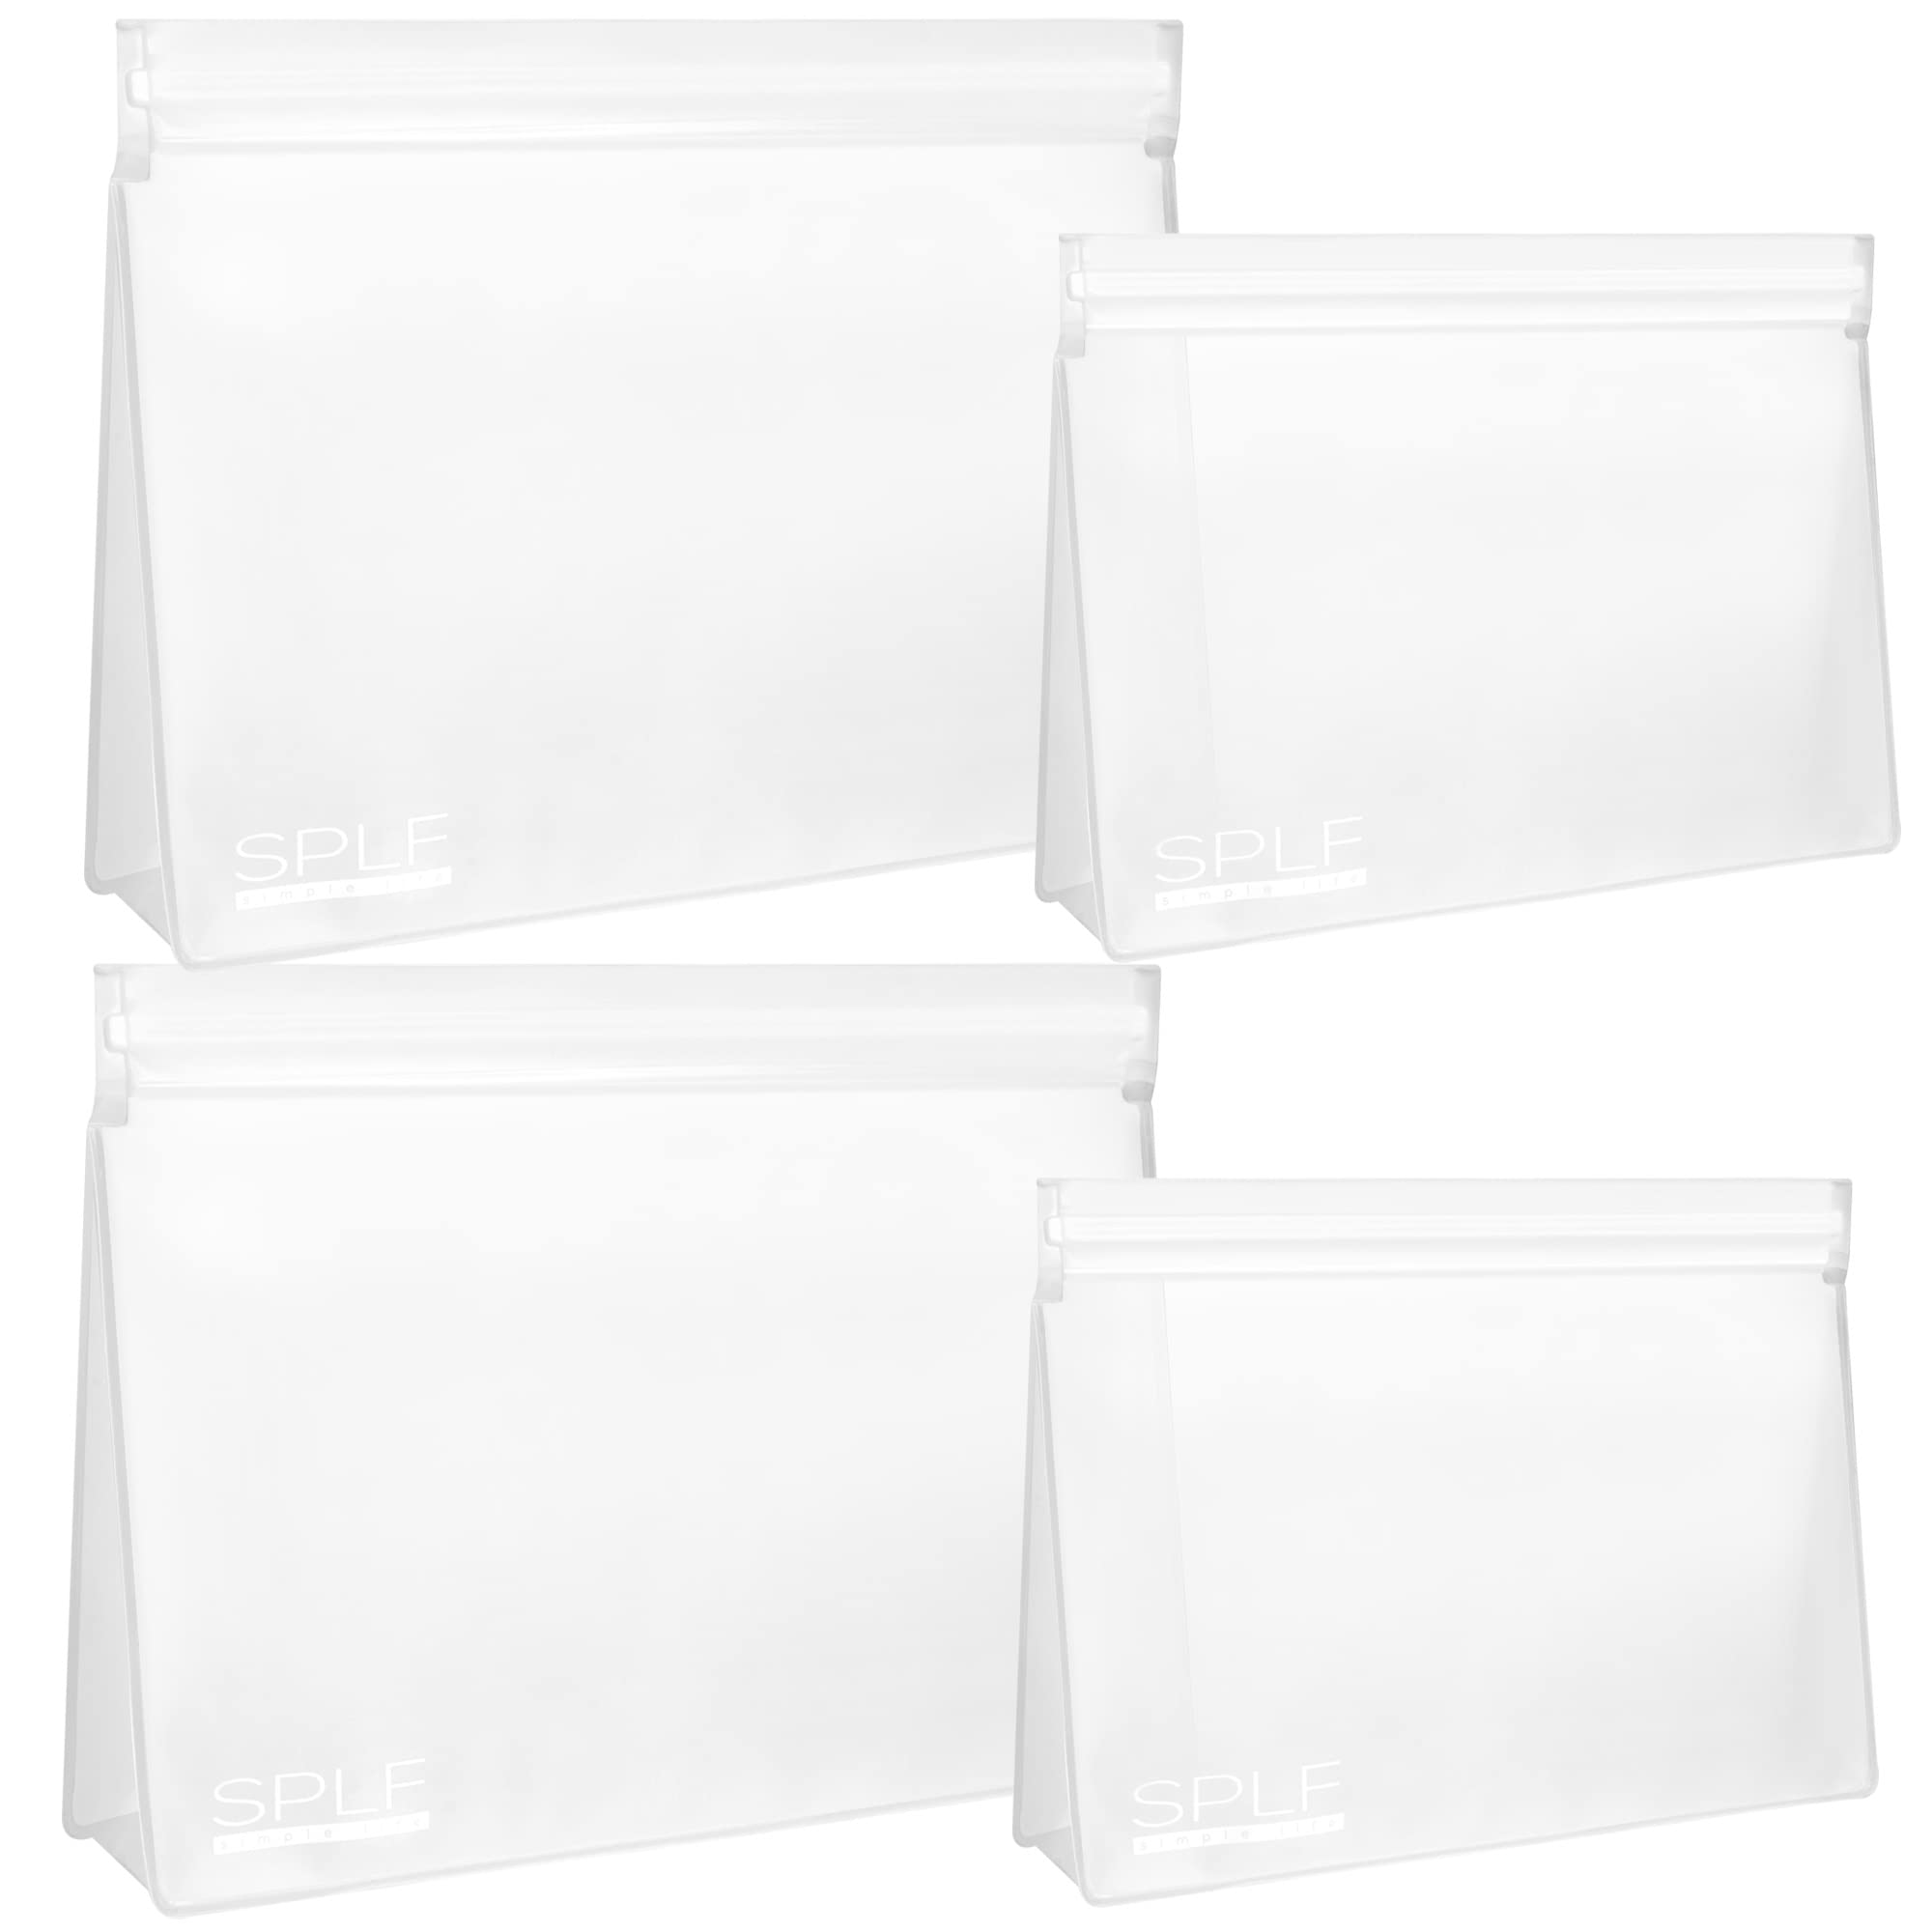 SPLF 4 Pack Leakproof Clear Toiletry bags TSA Approved Quart Size Zipper  Bags BPA Free Travel